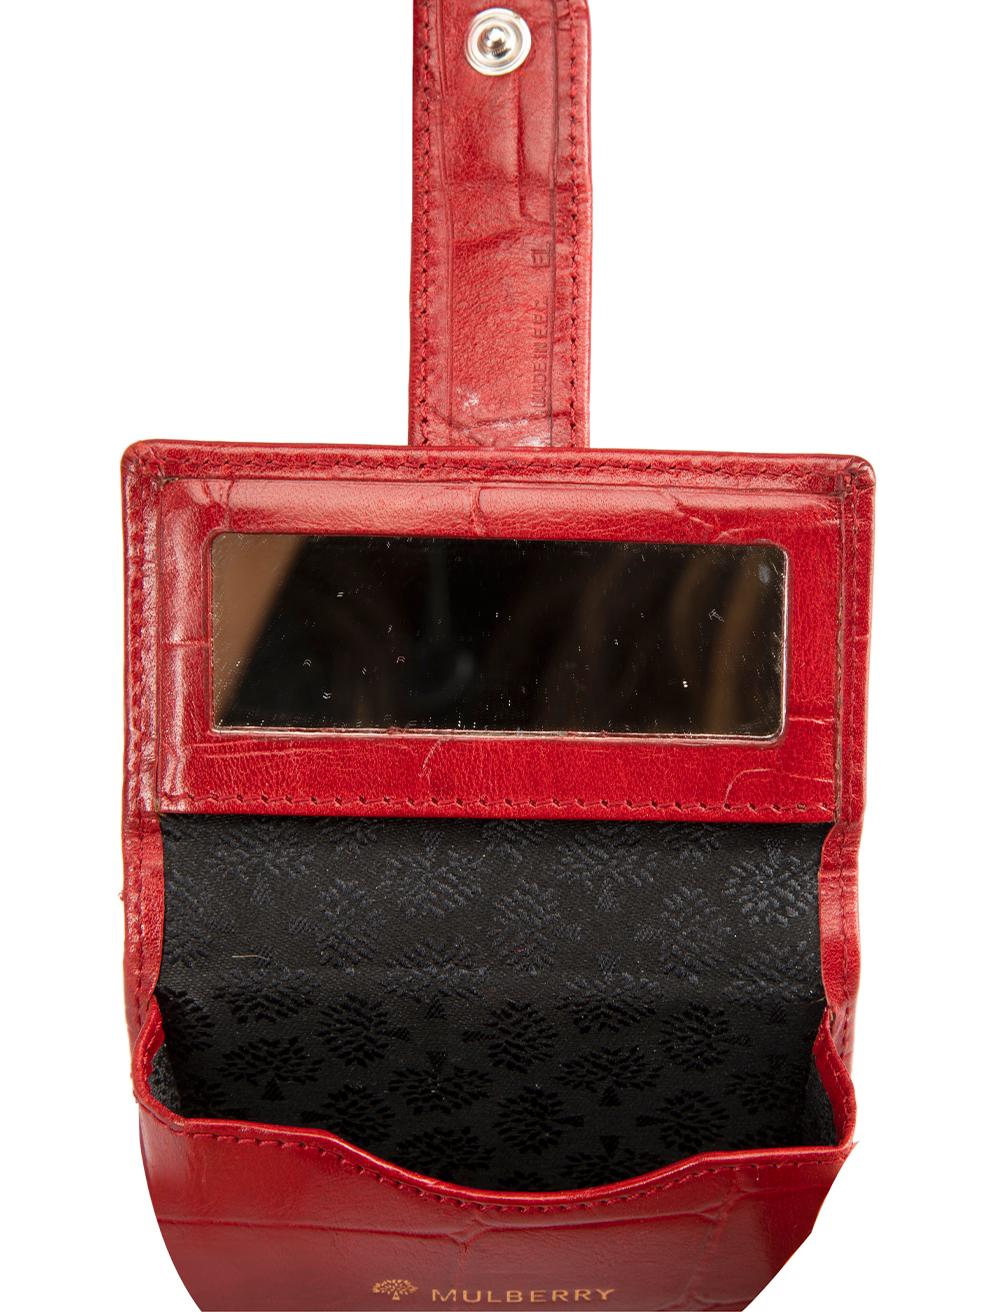 Mulberry Women's Vintage Red Leather Croc Embossed Lipstick Pouch with Mirror For Sale 1